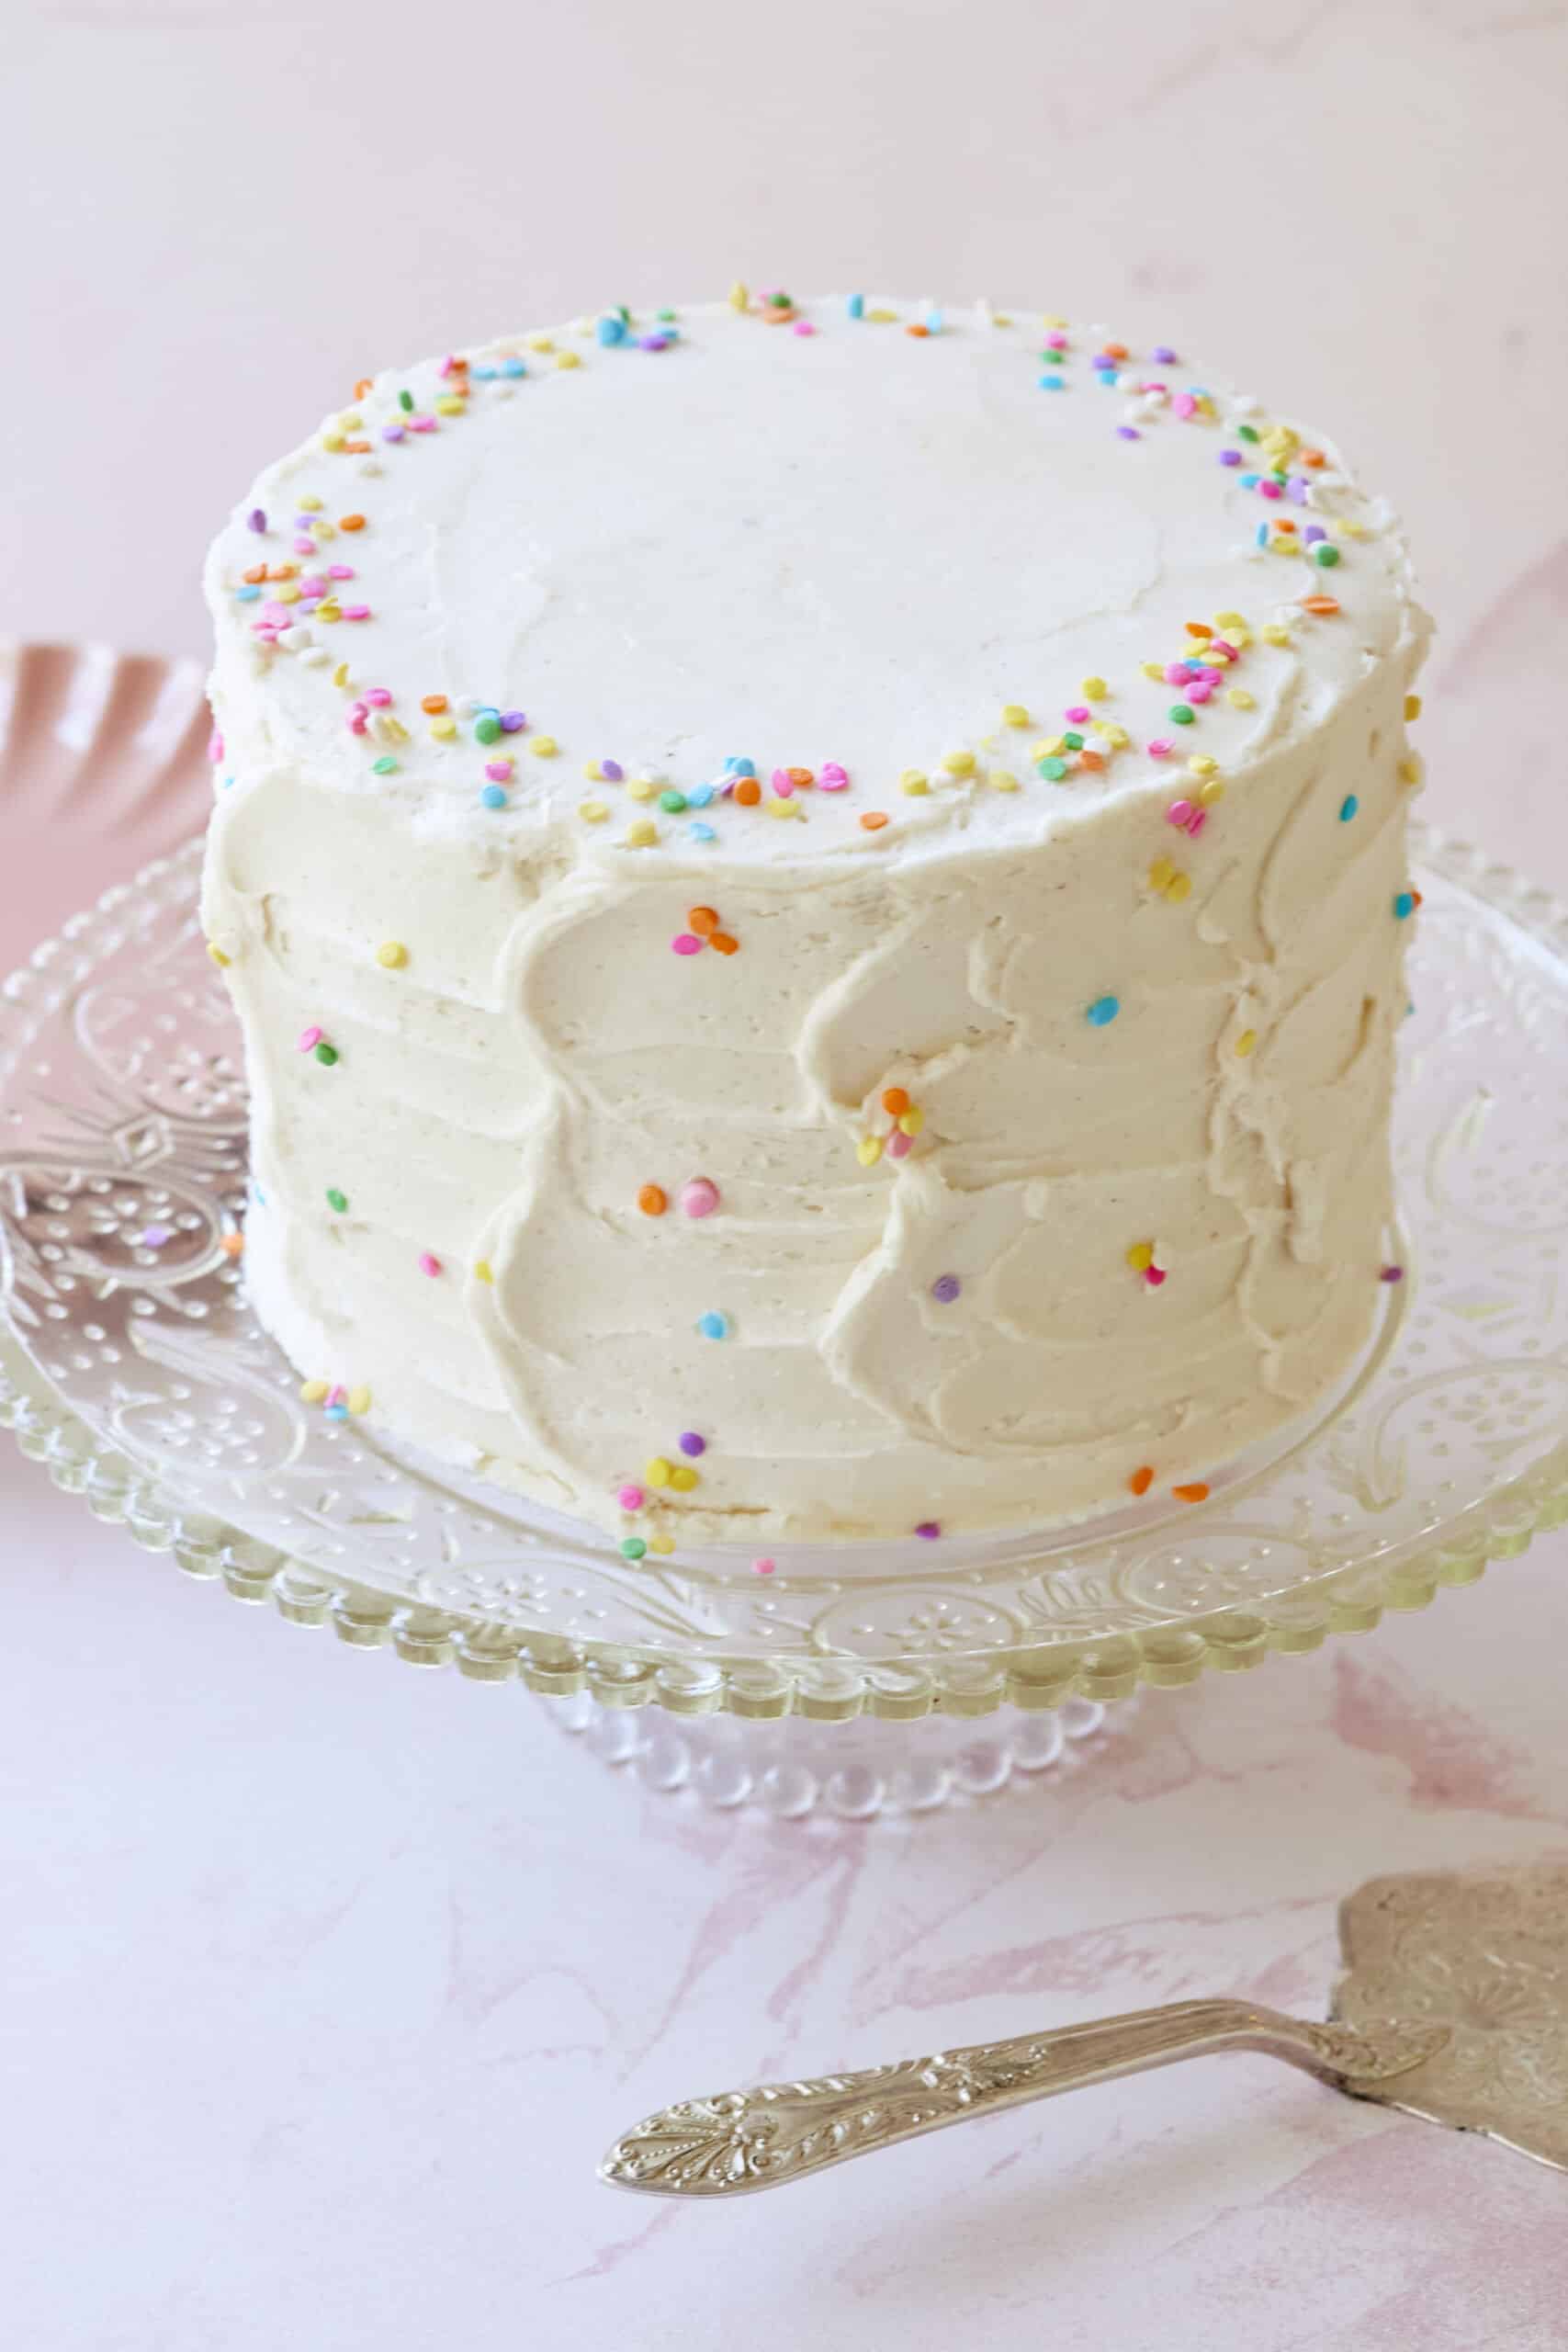 Vanilla Almond Flour Yellow Cake is frosted with white buttercream frosting and decorated with colorful sprinkles.